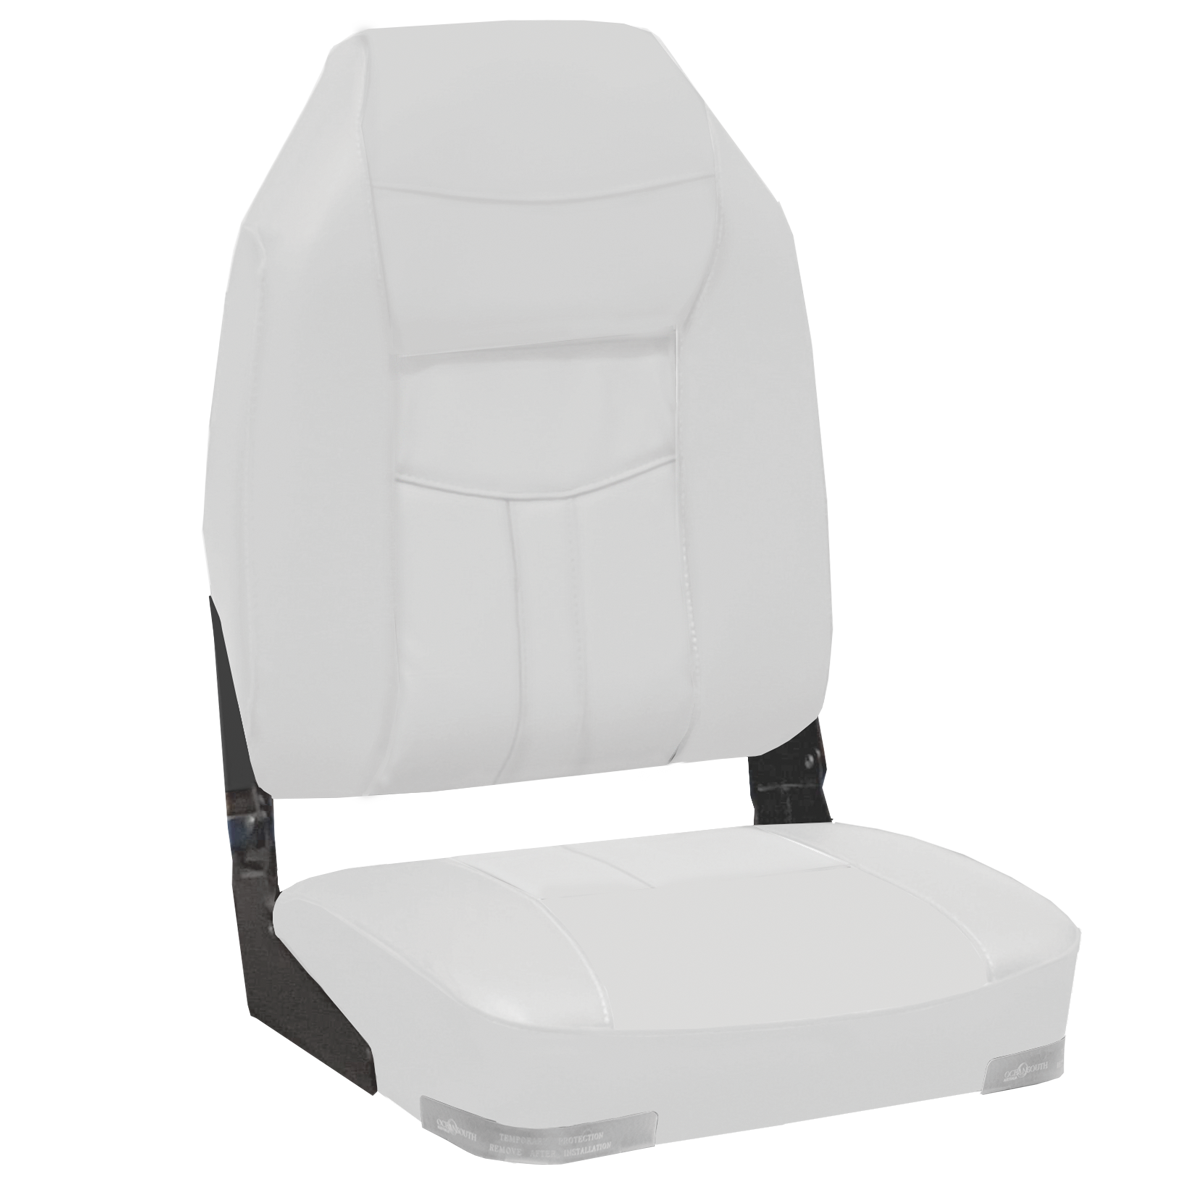 Deluxe High Back Upholstered Folding Seat With Aluminium Hinges White